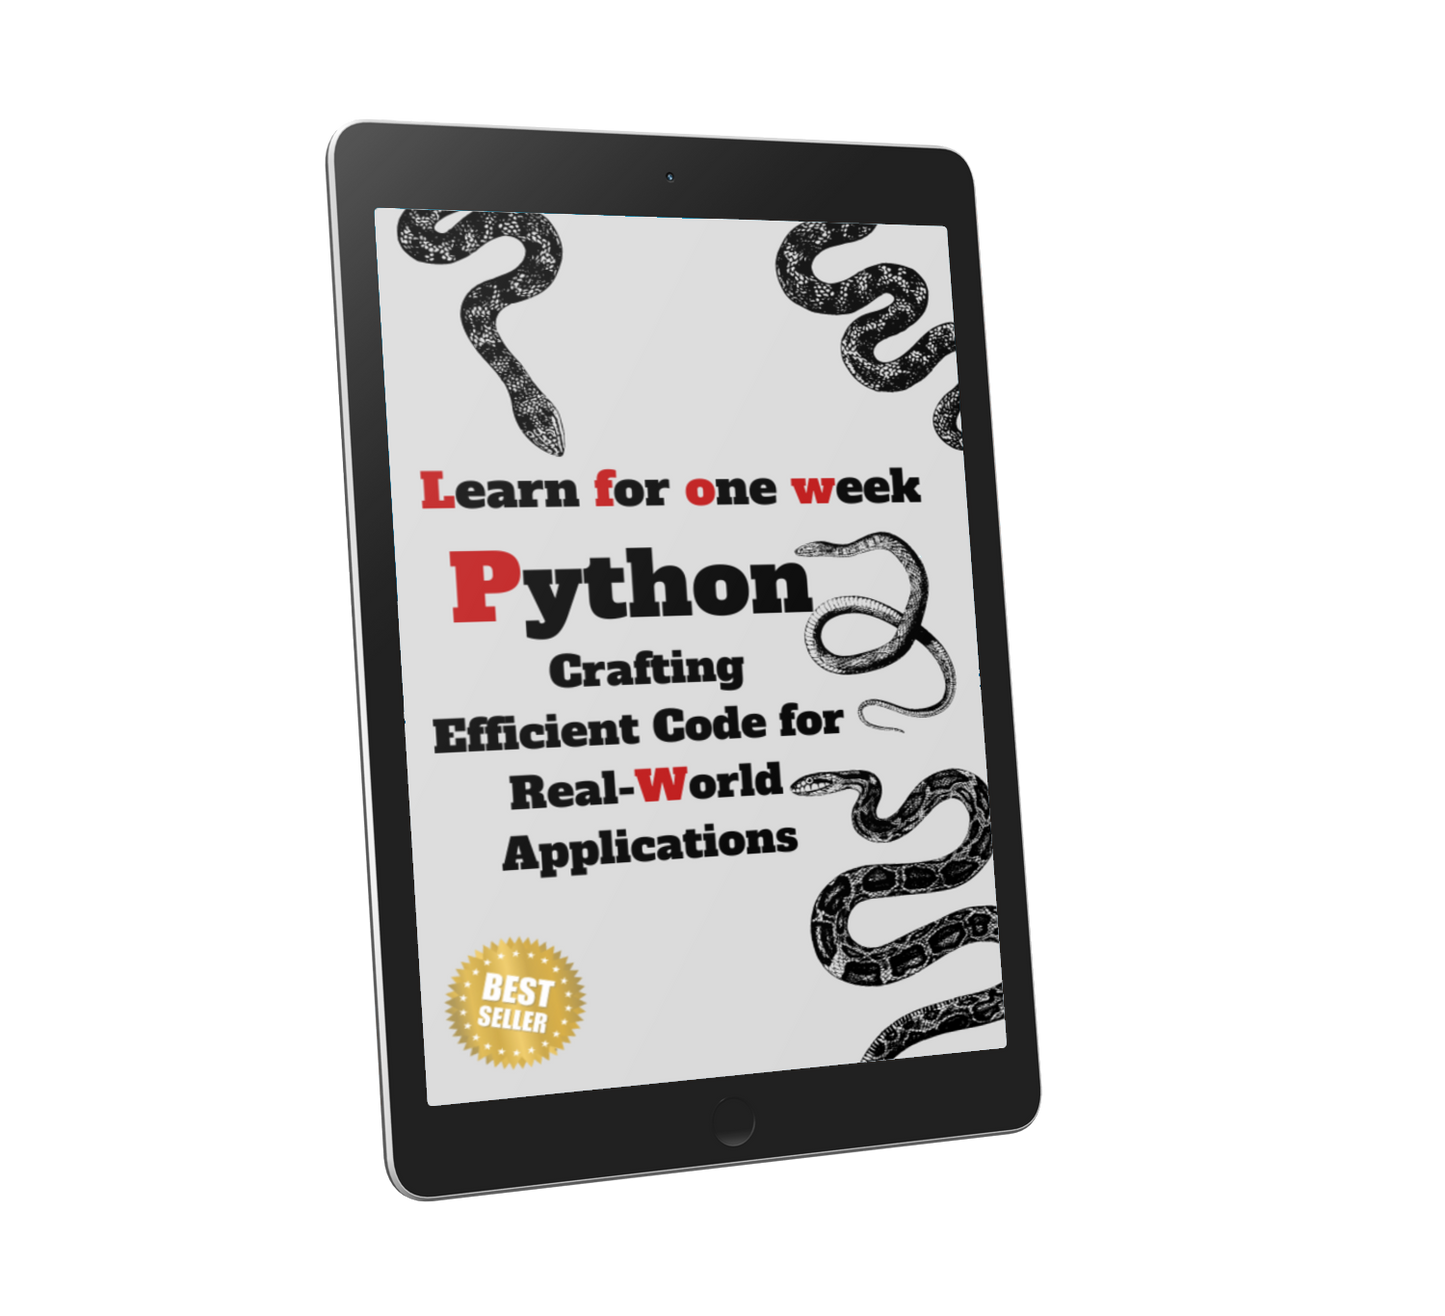 Learn python in one week